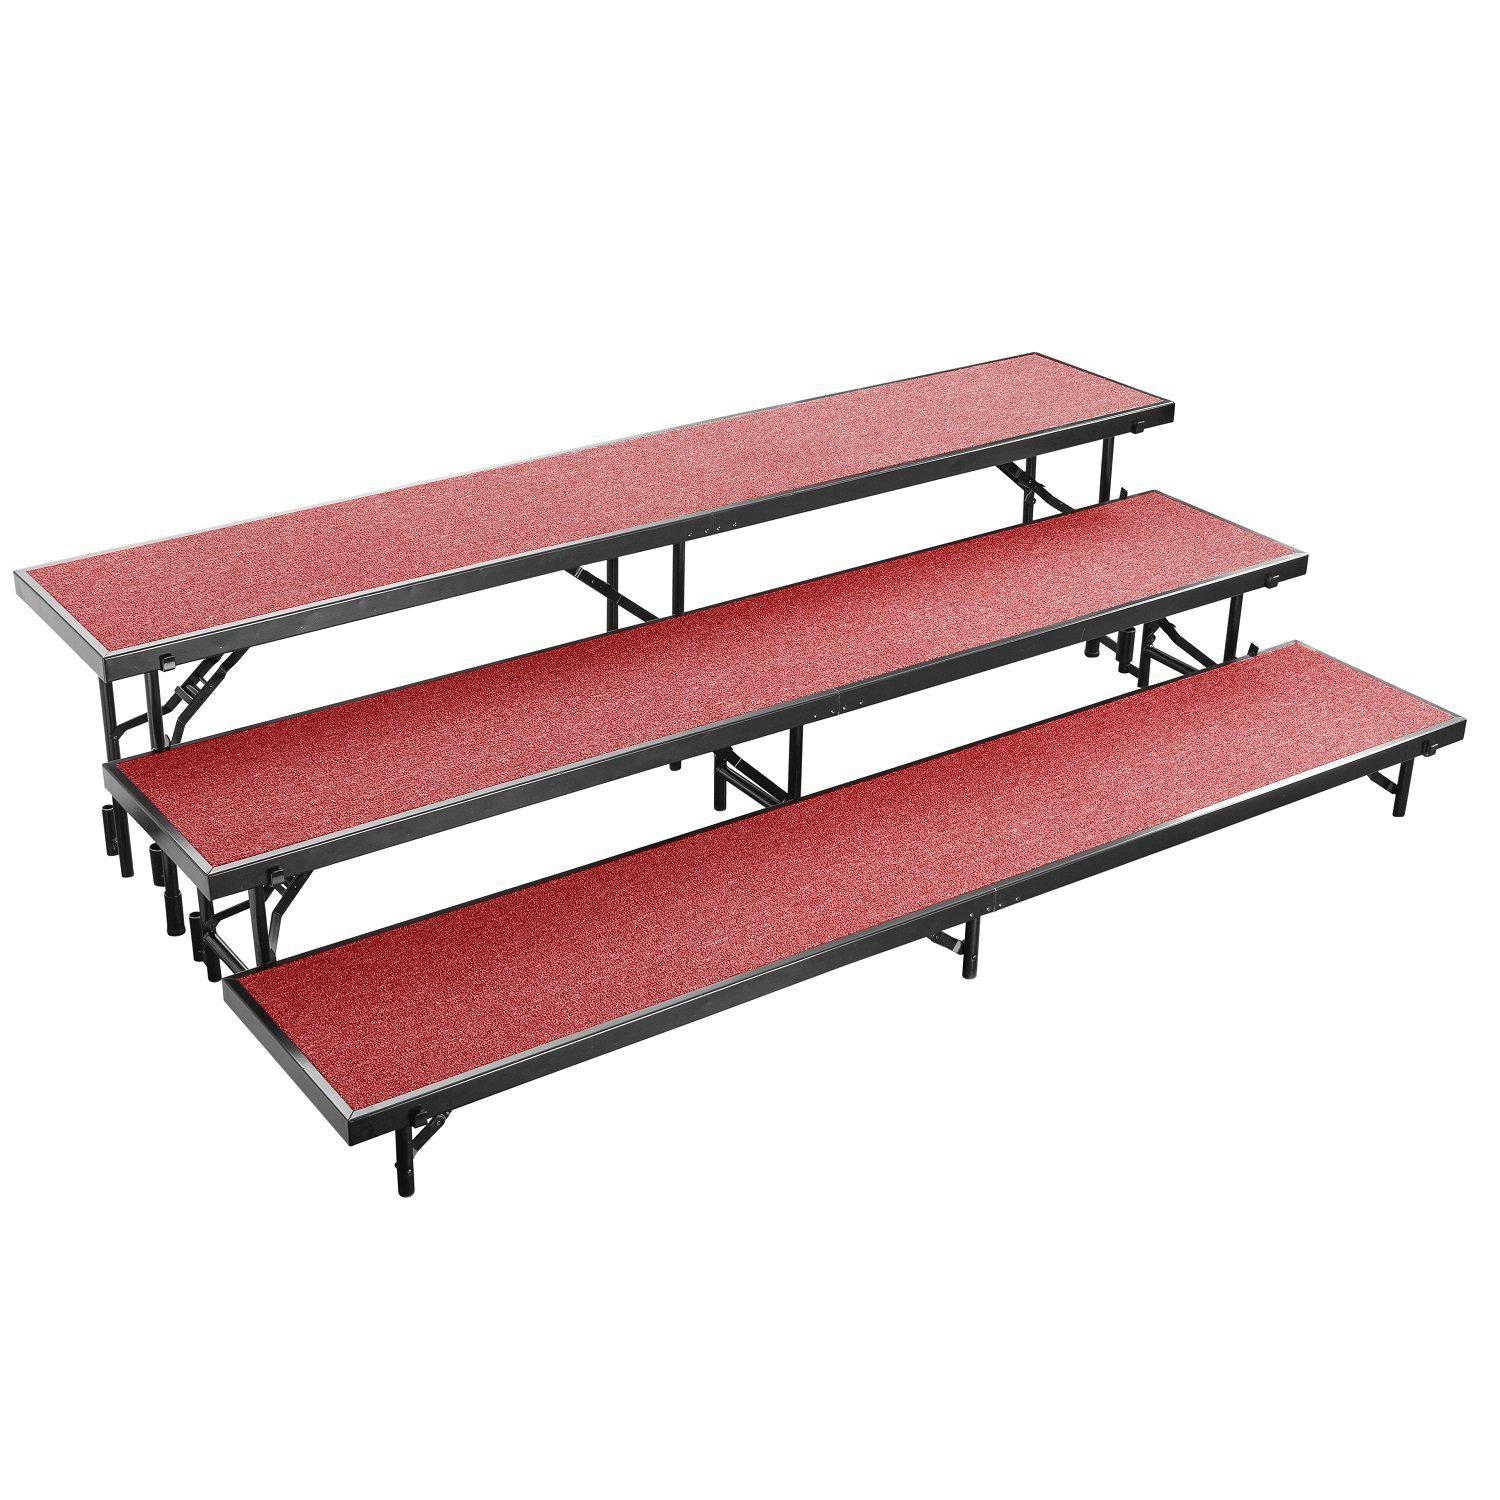 Easels & Risers for Schools & Libraries